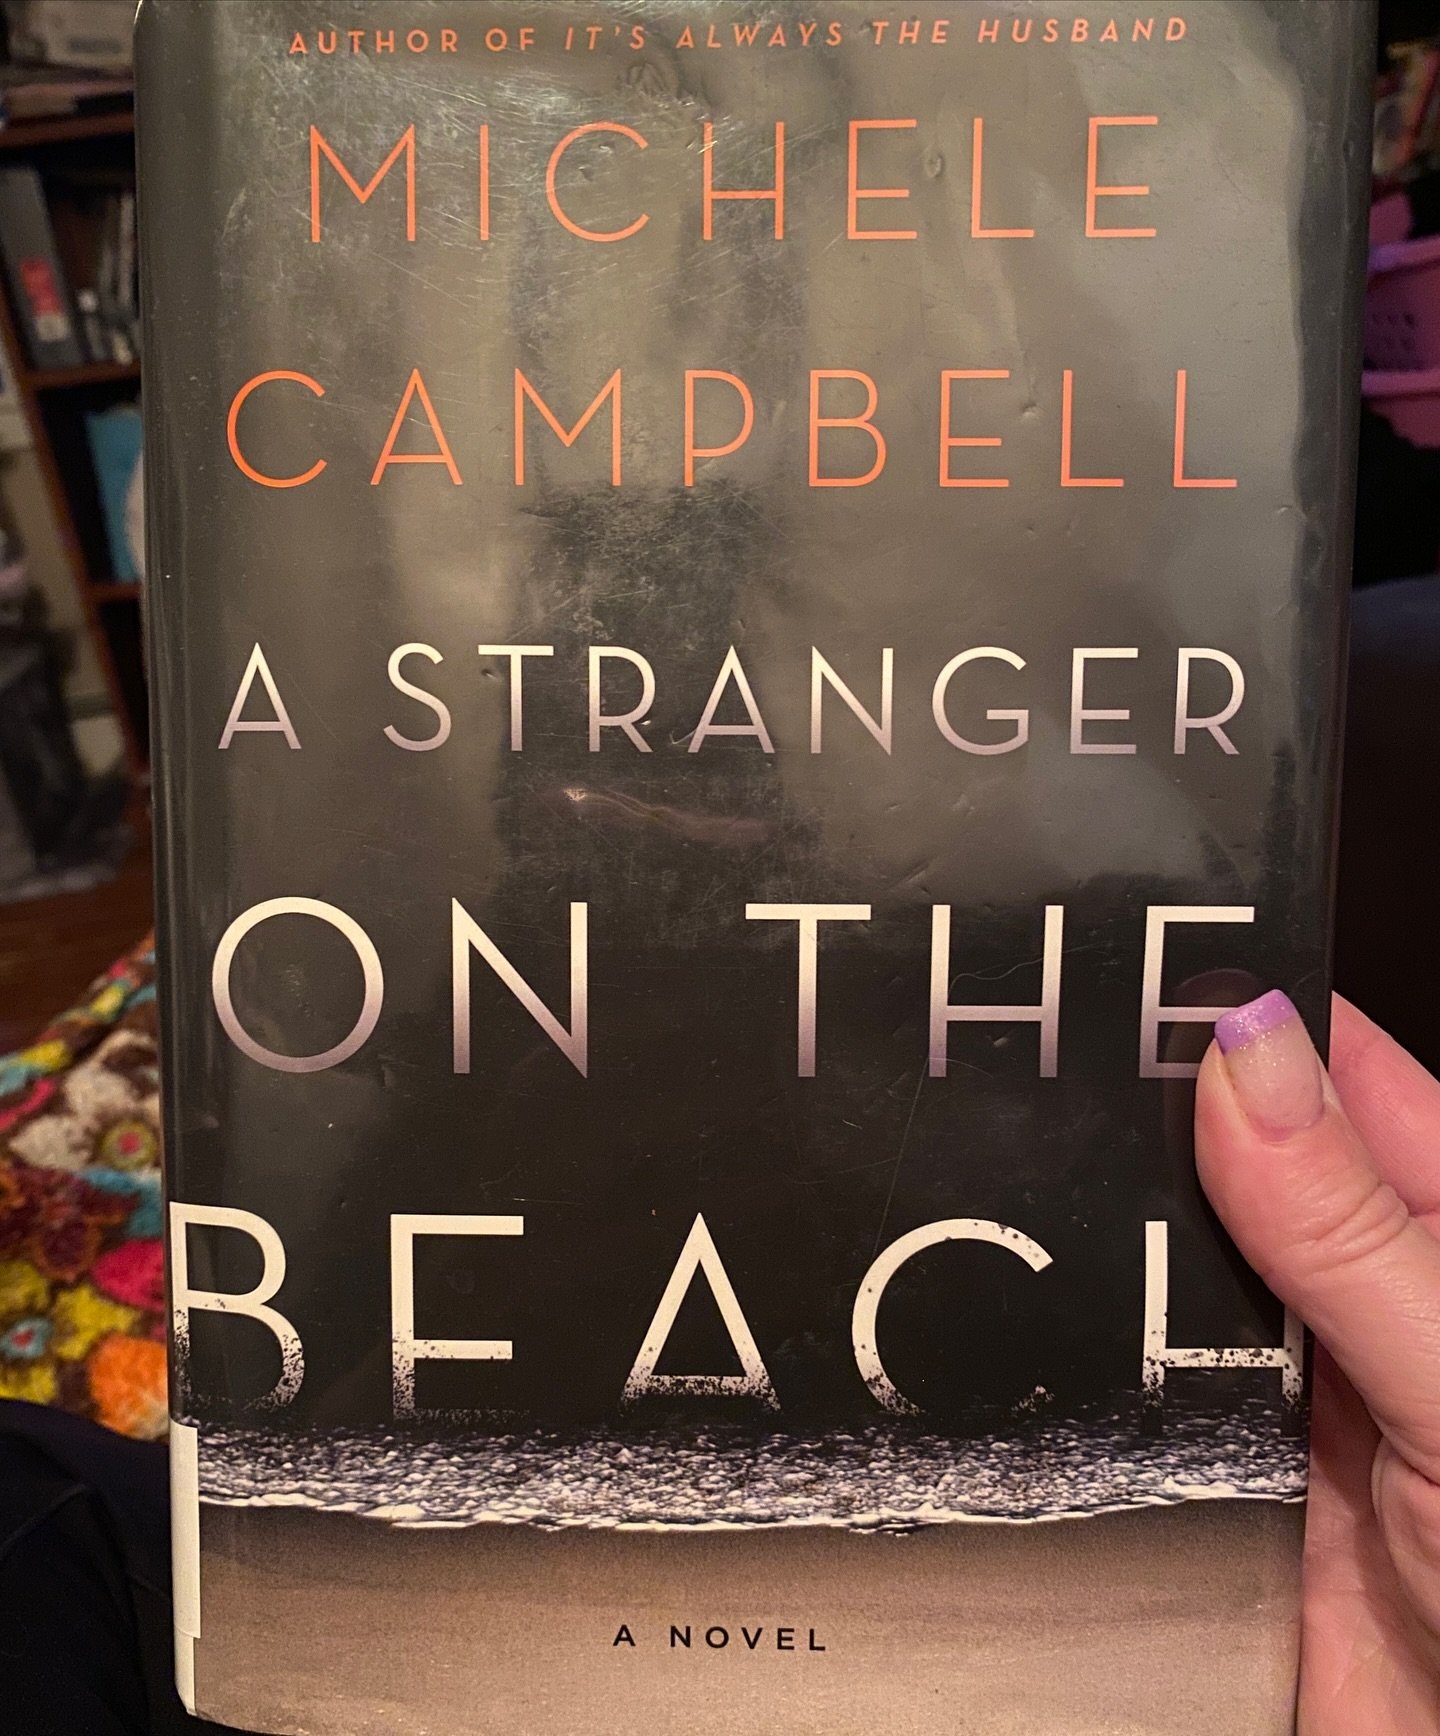 📚 this week&rsquo;s read - A Stranger on the Beach by Michele Campbell @michelecampbellbooks

This is my 3rd read of a book authored by her.

I love how she writes - I&rsquo;m immediately drawn in.

What are you reading this week?

If you aren&rsquo